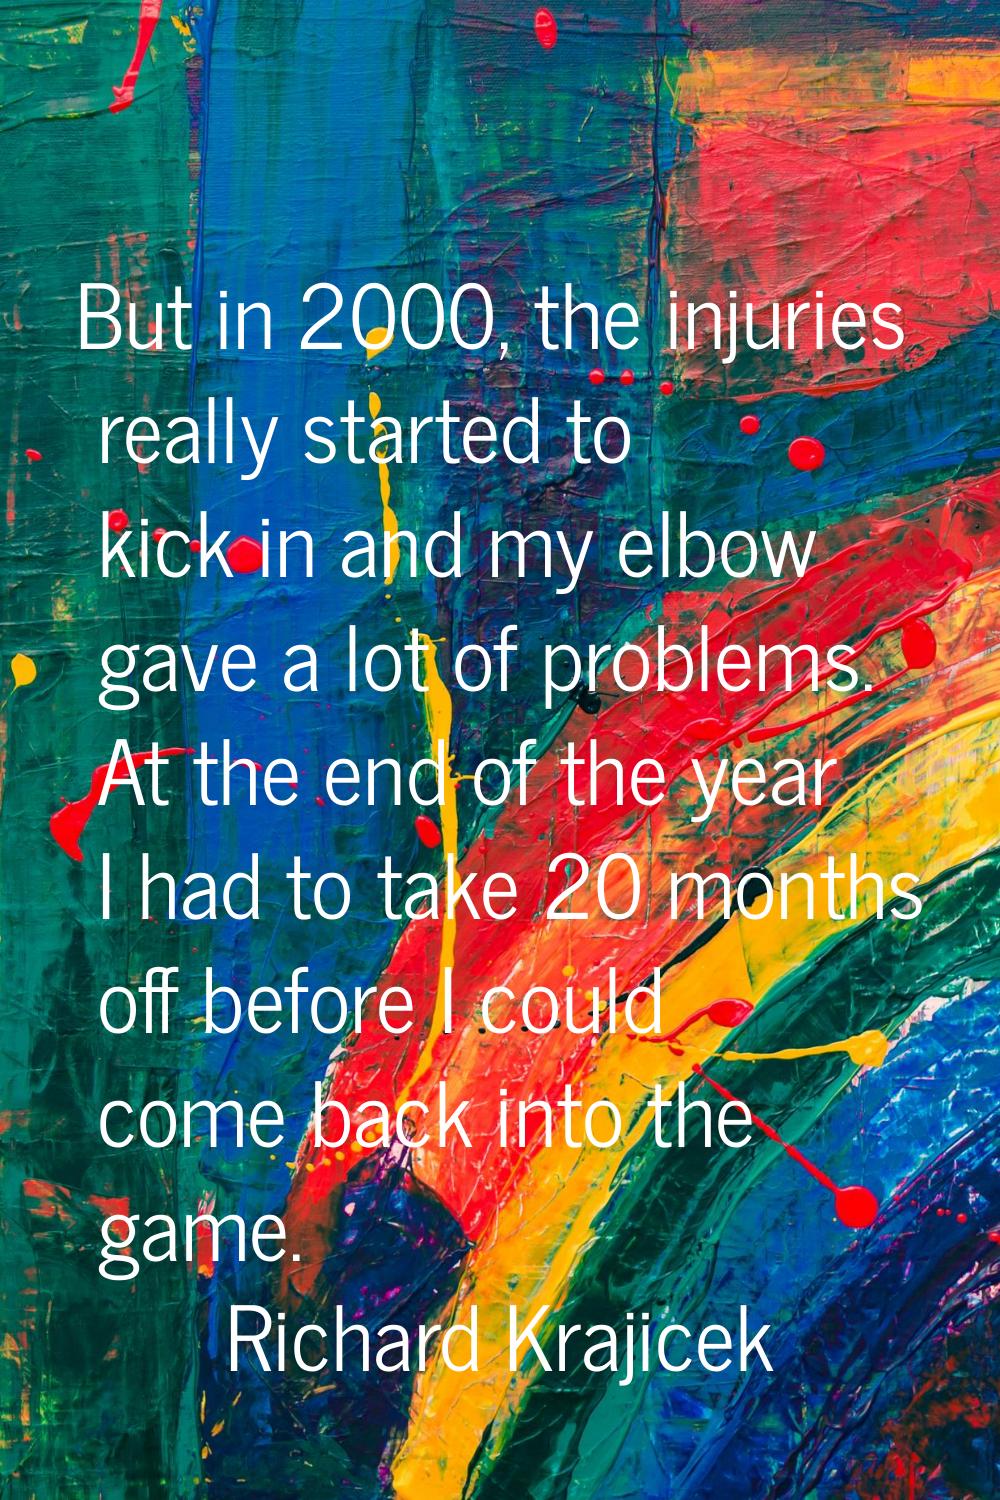 But in 2000, the injuries really started to kick in and my elbow gave a lot of problems. At the end